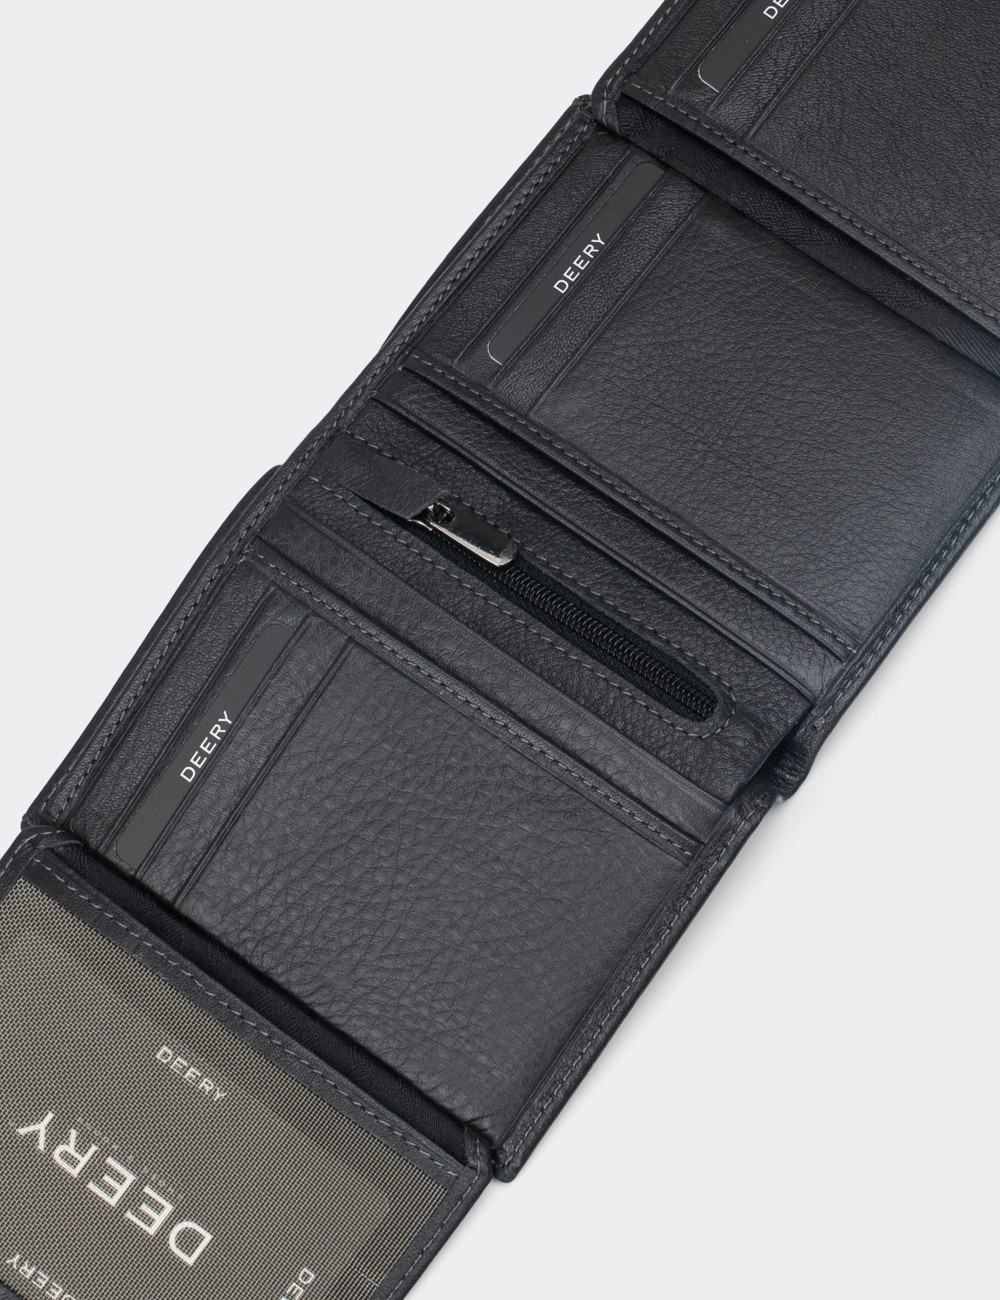  Leather Gray Men's Wallet - 00288MGRIZ01